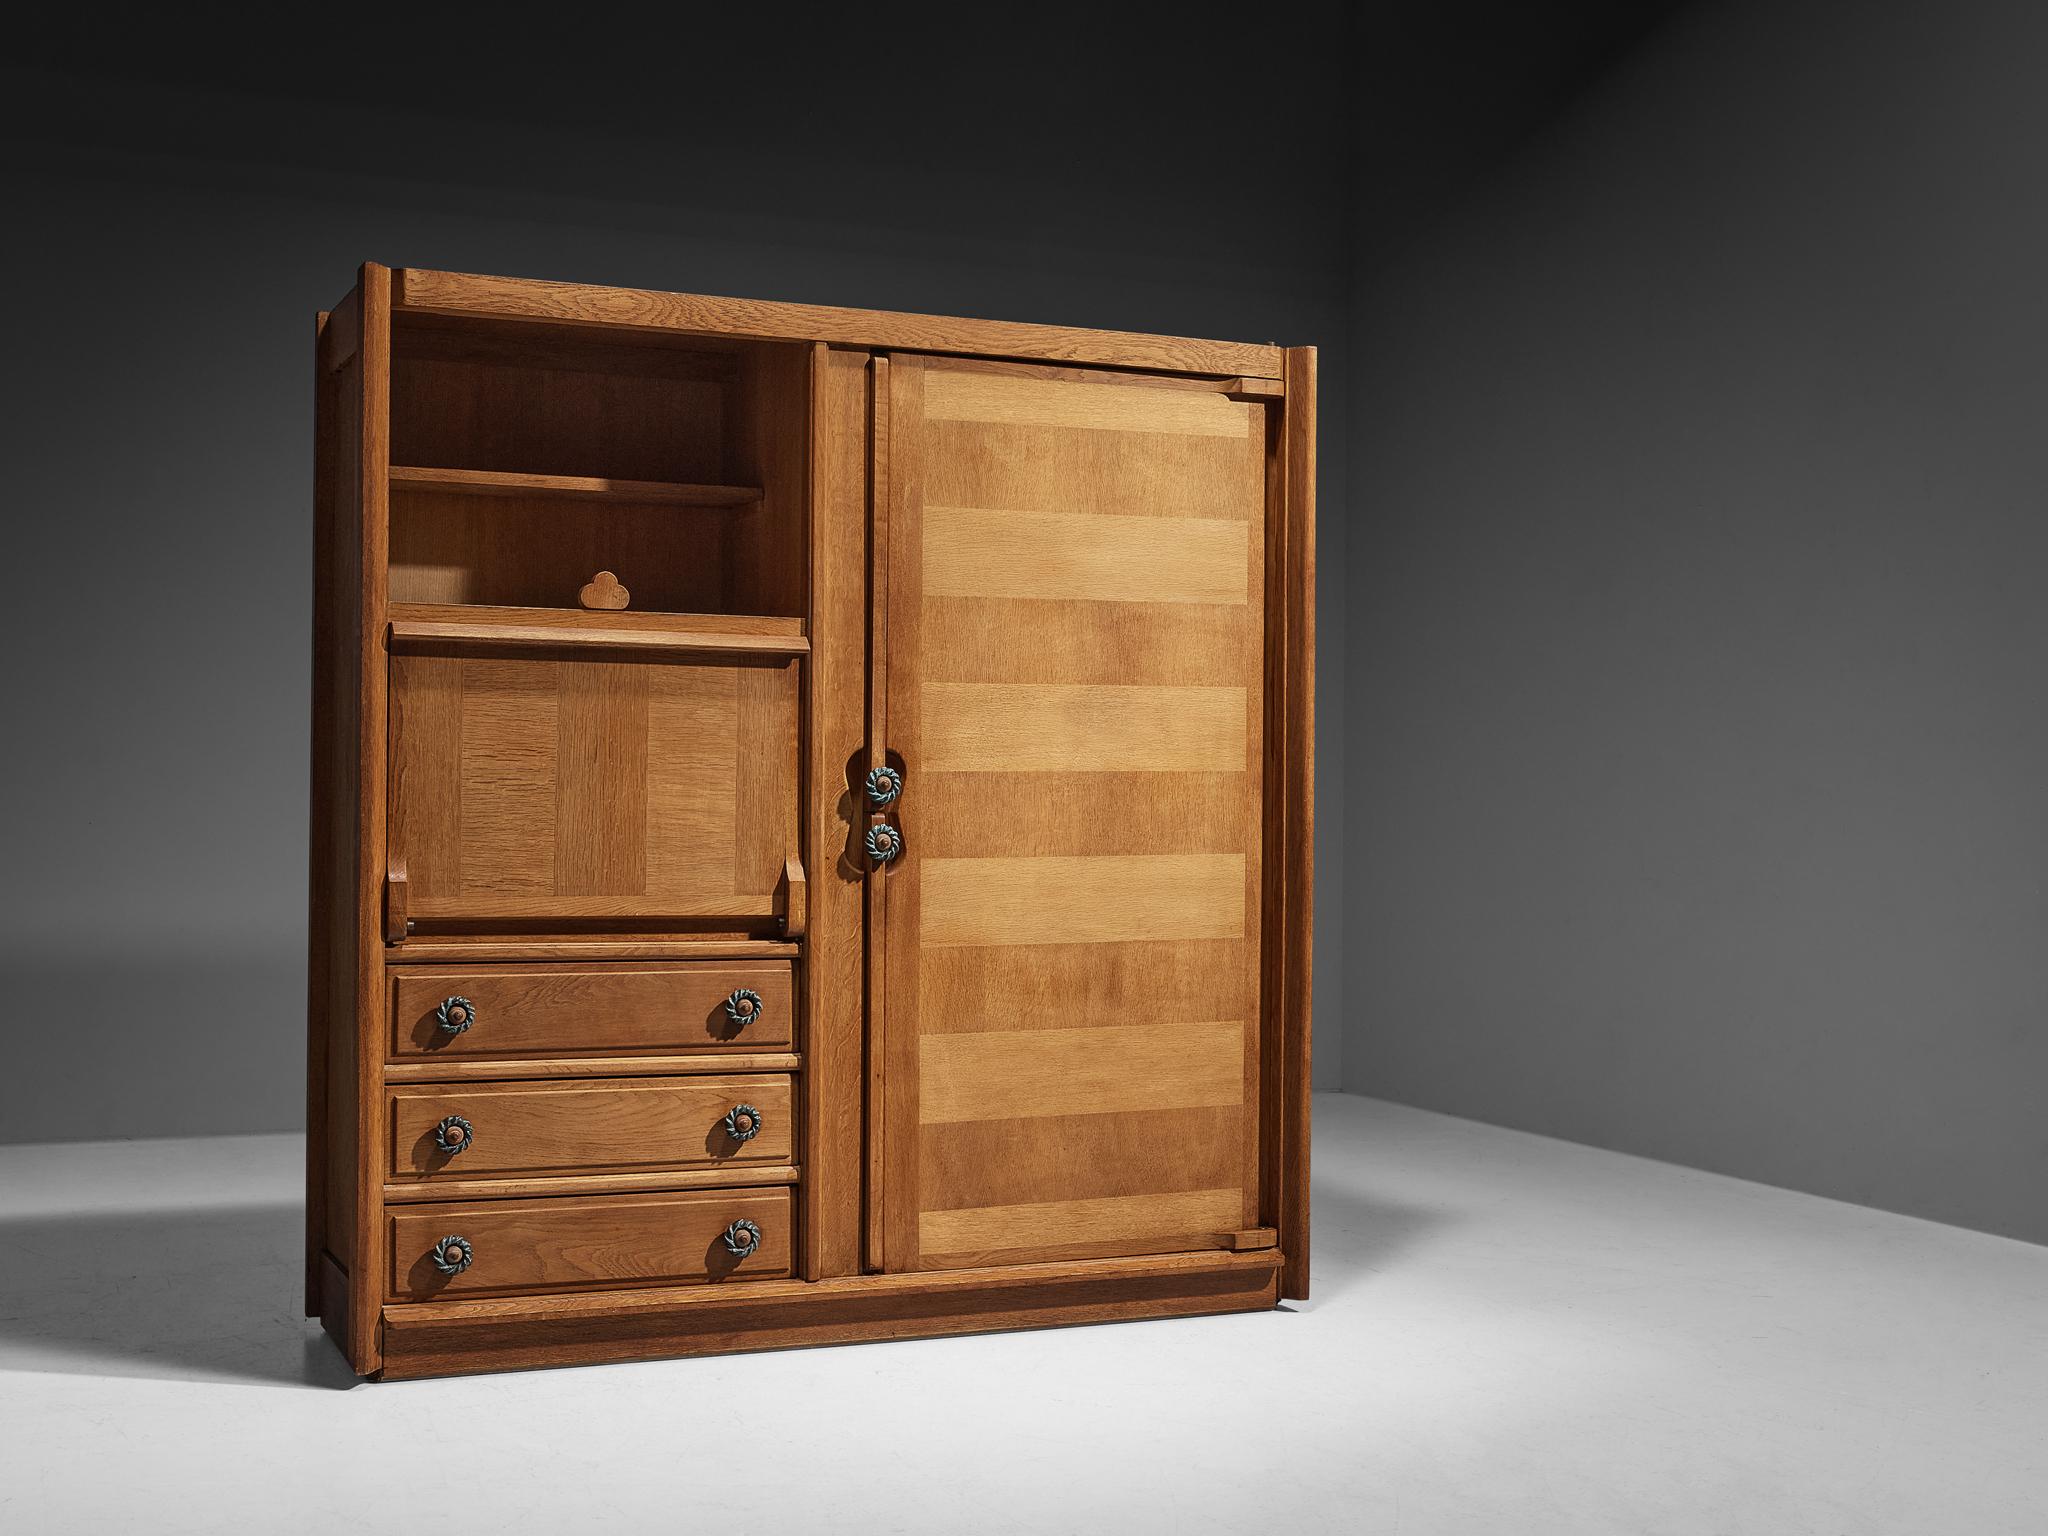 Guillerme et Chambron, armoire, oak, leather, ceramic, France, 1960s

This wardrobe is based on a well-designed structure where aesthetics and functionally come hand in hand. The door panels holds the characteristics of the French designer duo